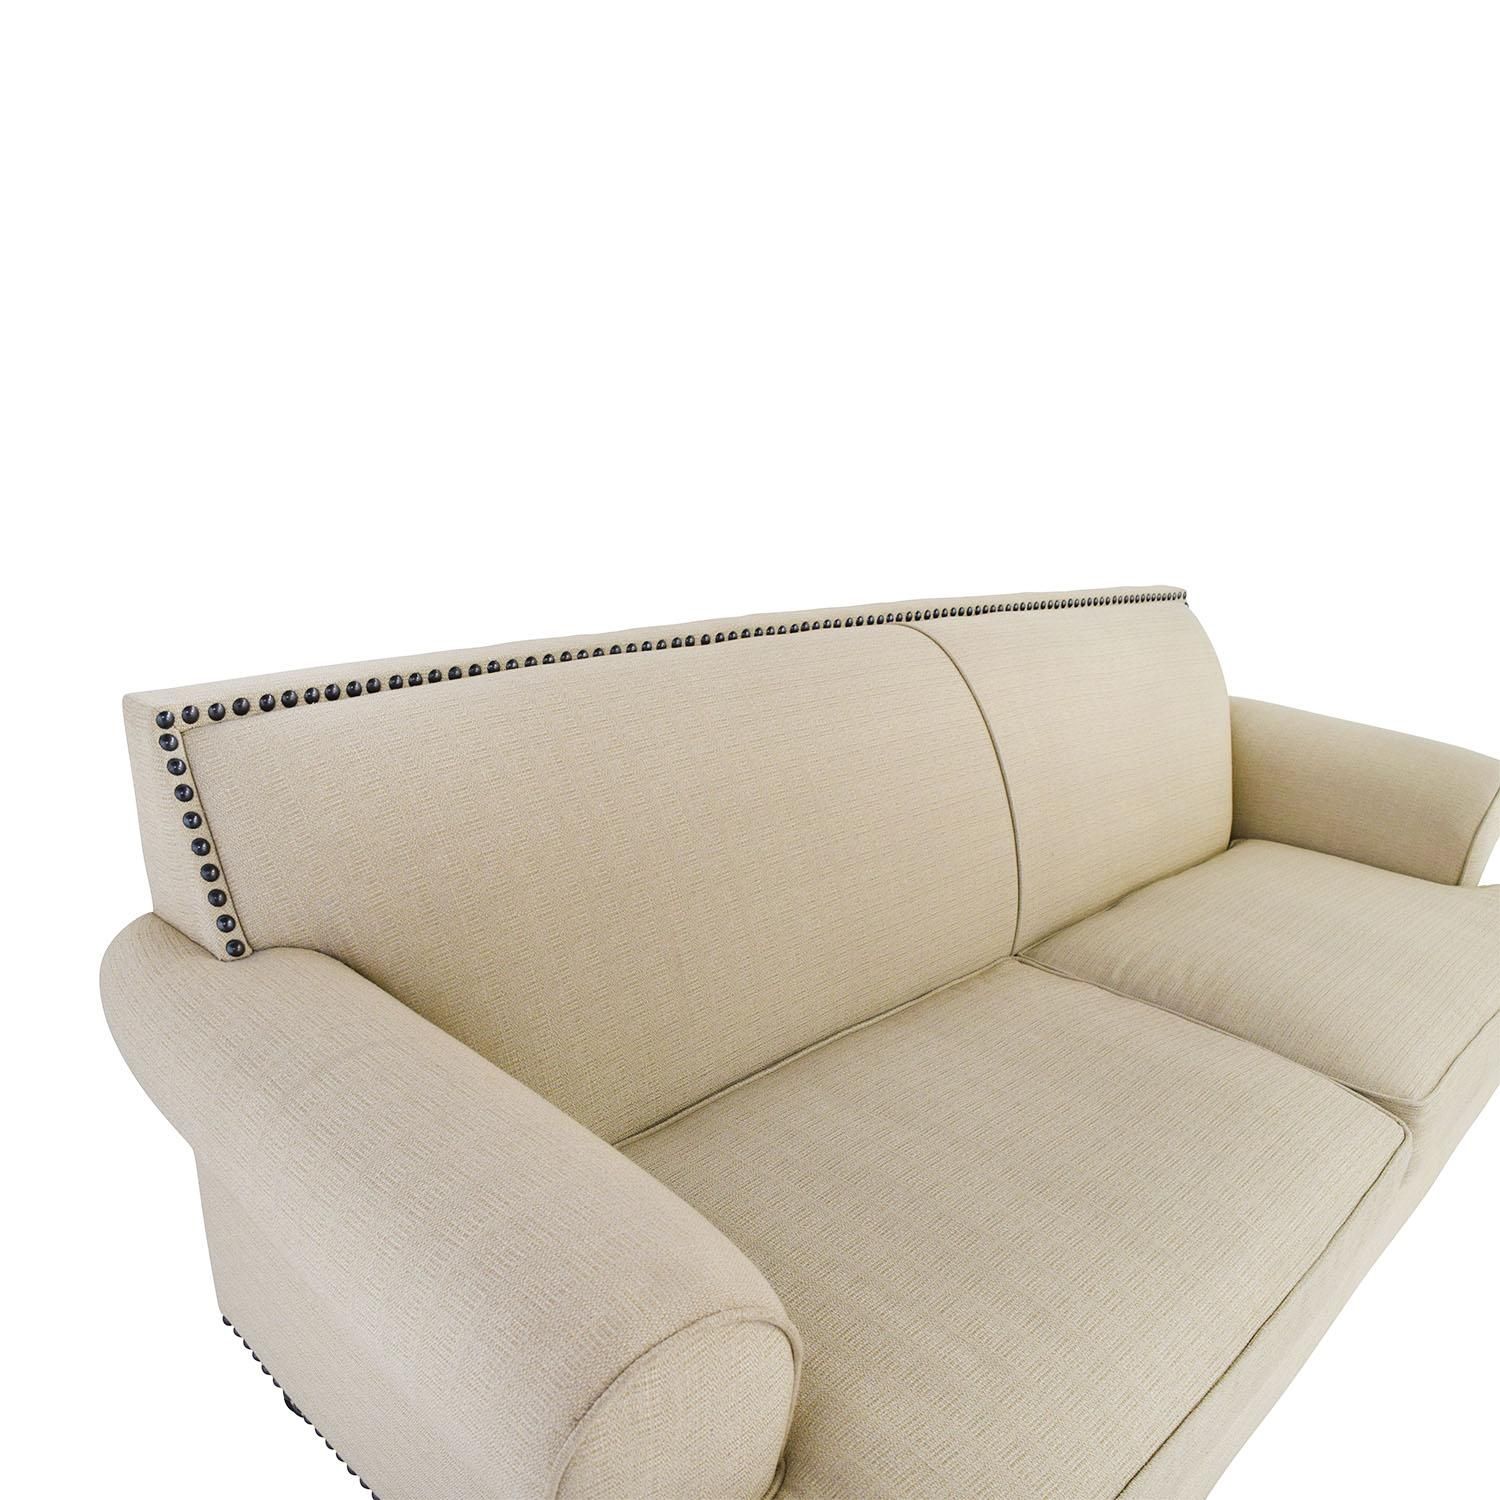 48% Off – Pier 1 Pier 1 Carmen Tan Couch With Studs / Sofas Within Pier 1 Sofas (View 13 of 20)